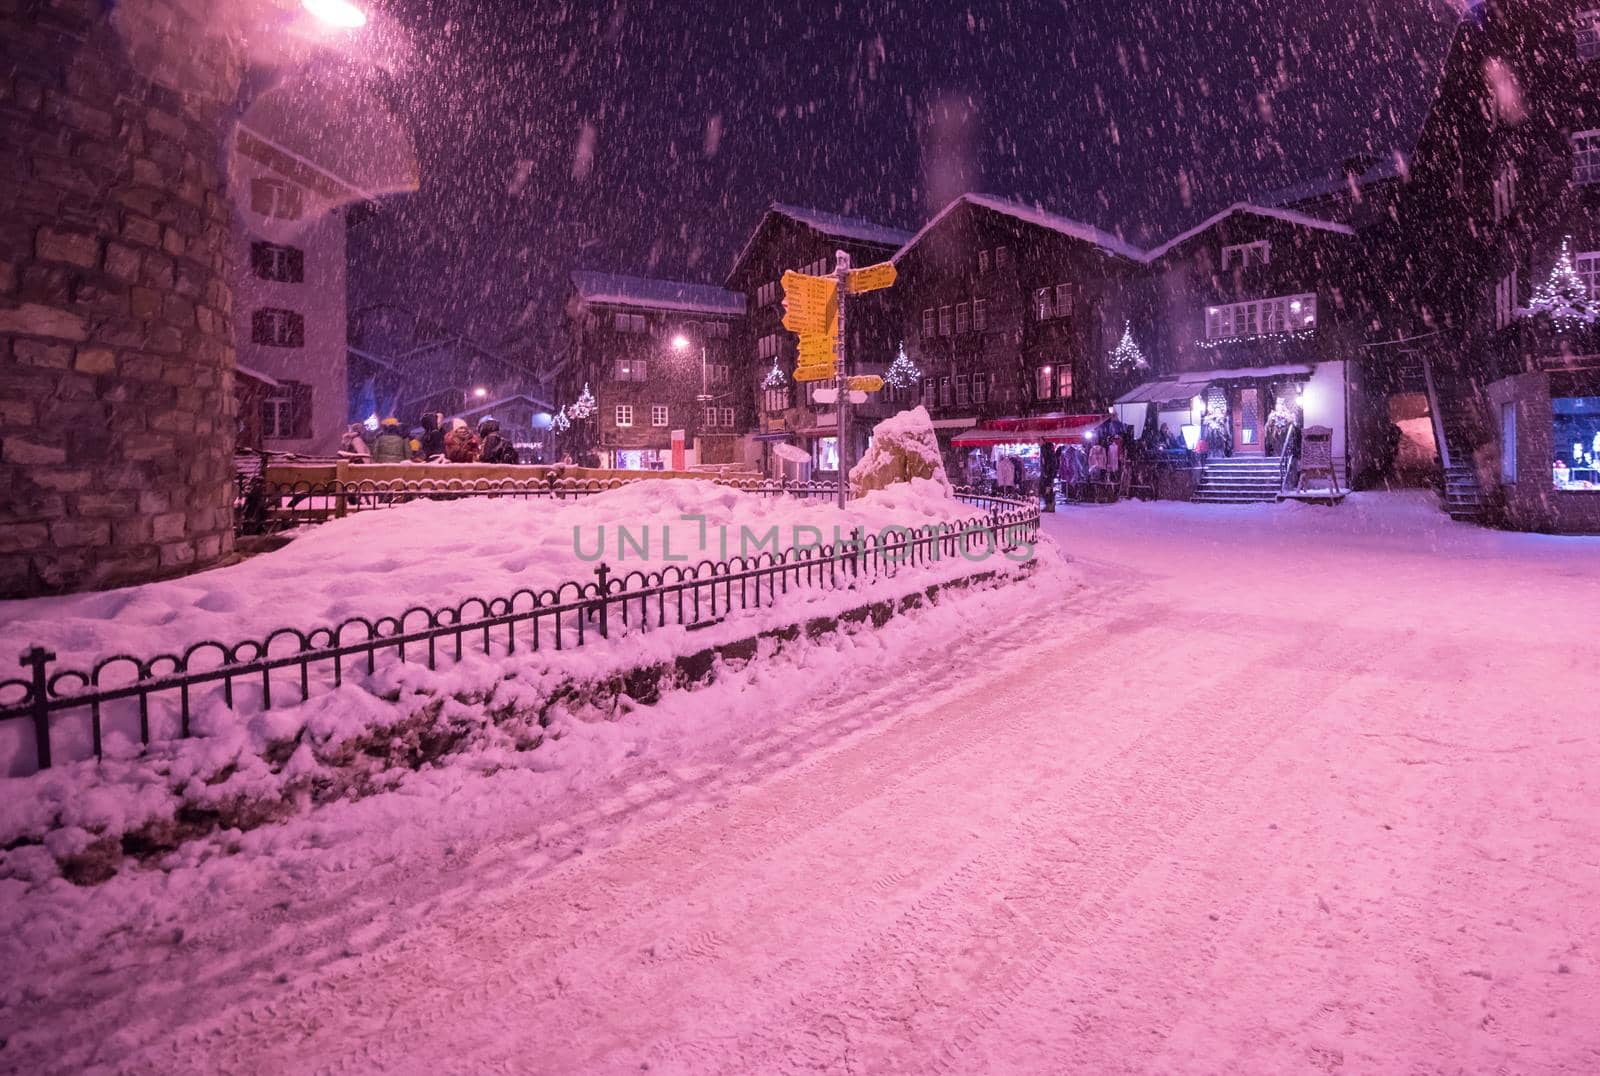 snowy streets of the Alpine mountain village by dotshock